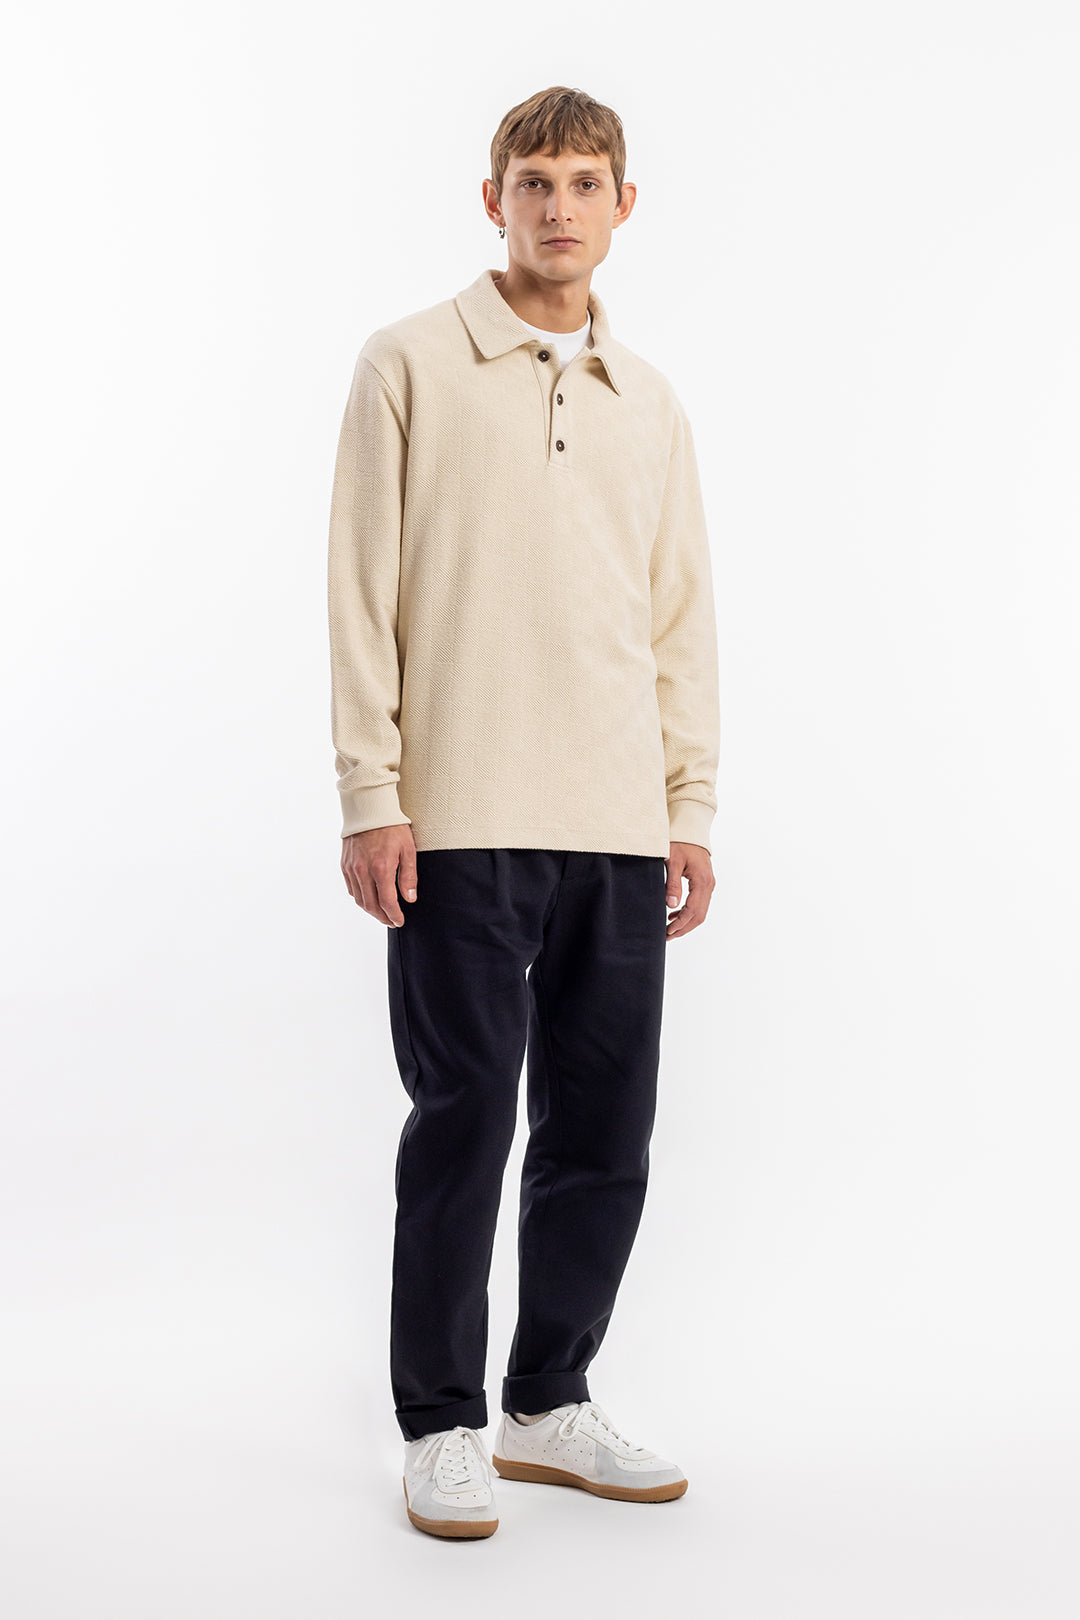 Beige, long-sleeved polo shirt made of organic cotton from Rotholz